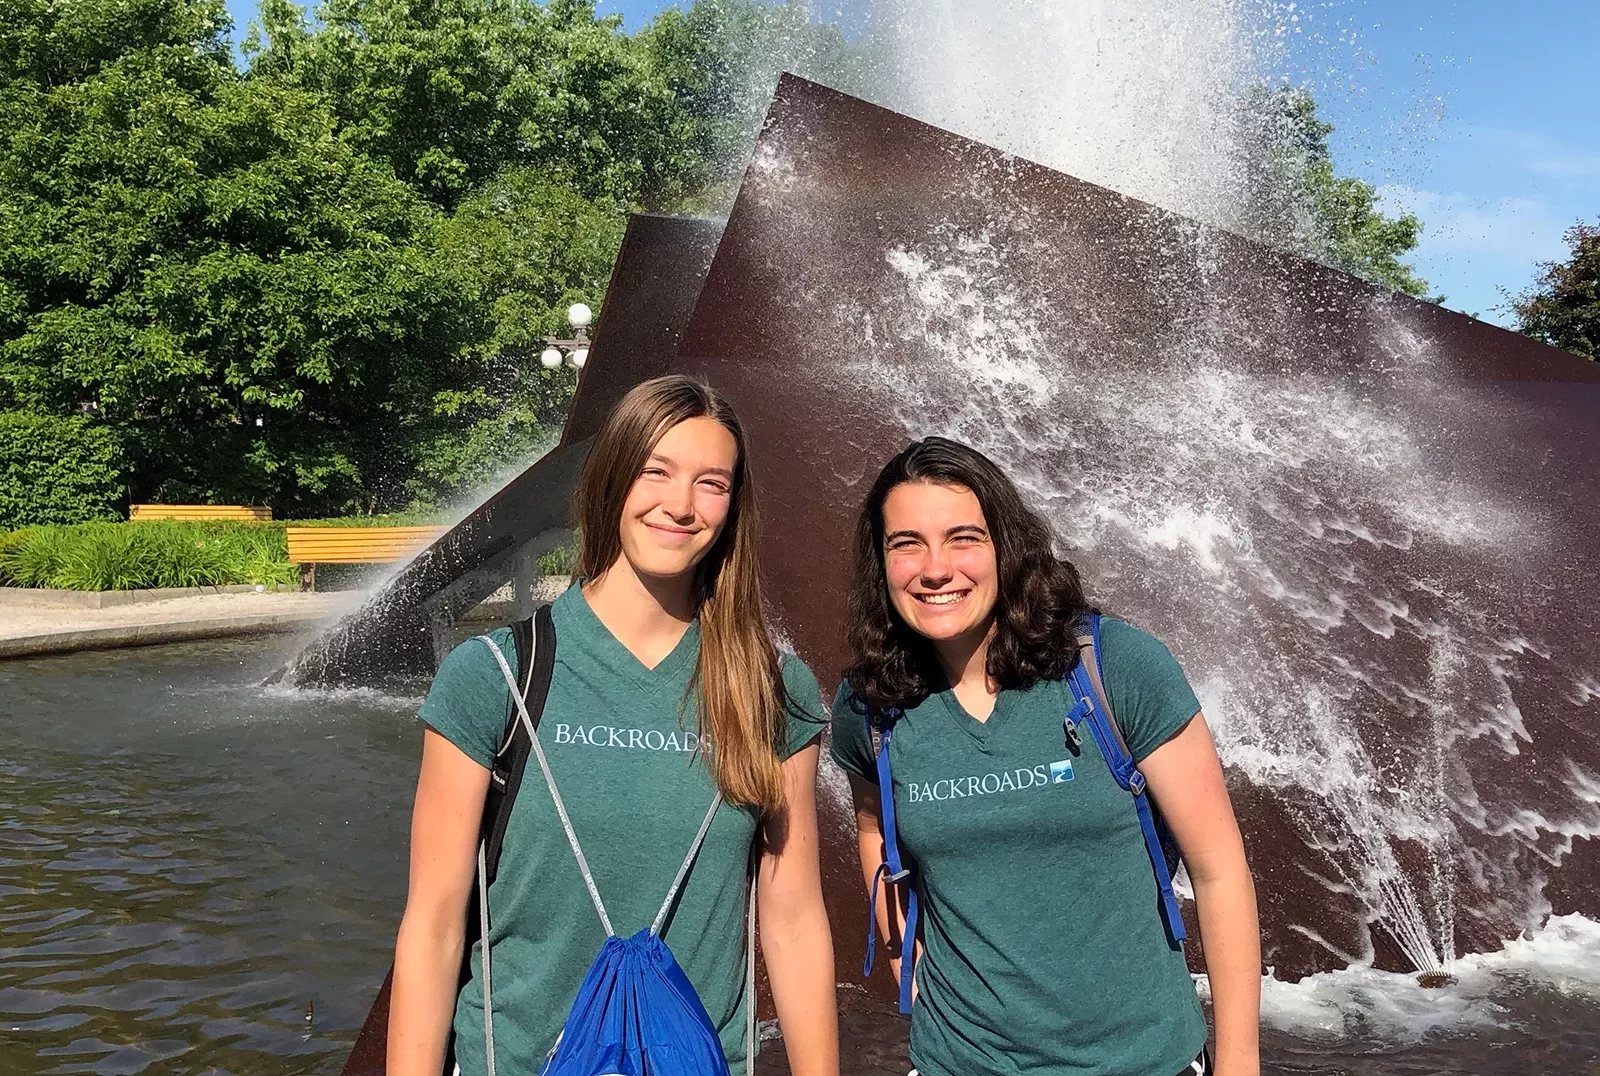 Two young guests smiling in front of a water sculpture.